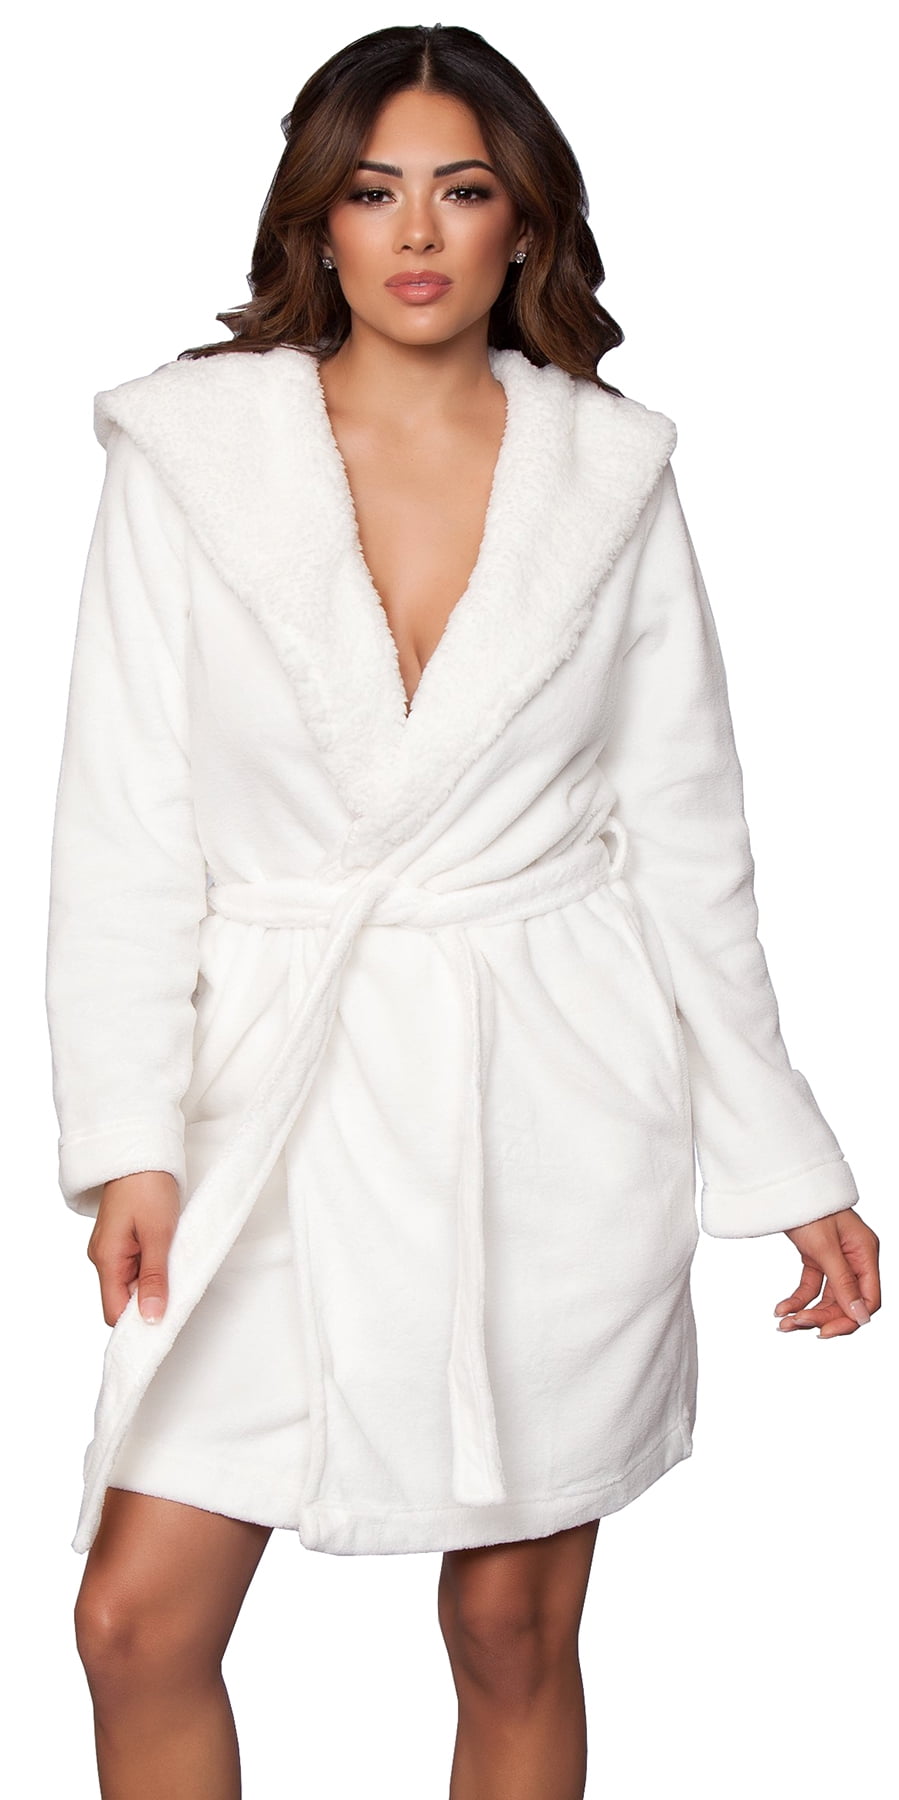 Loungeable Womens Coral Fleece Dressing Gown Ladies Soft Nightwear White Robe 